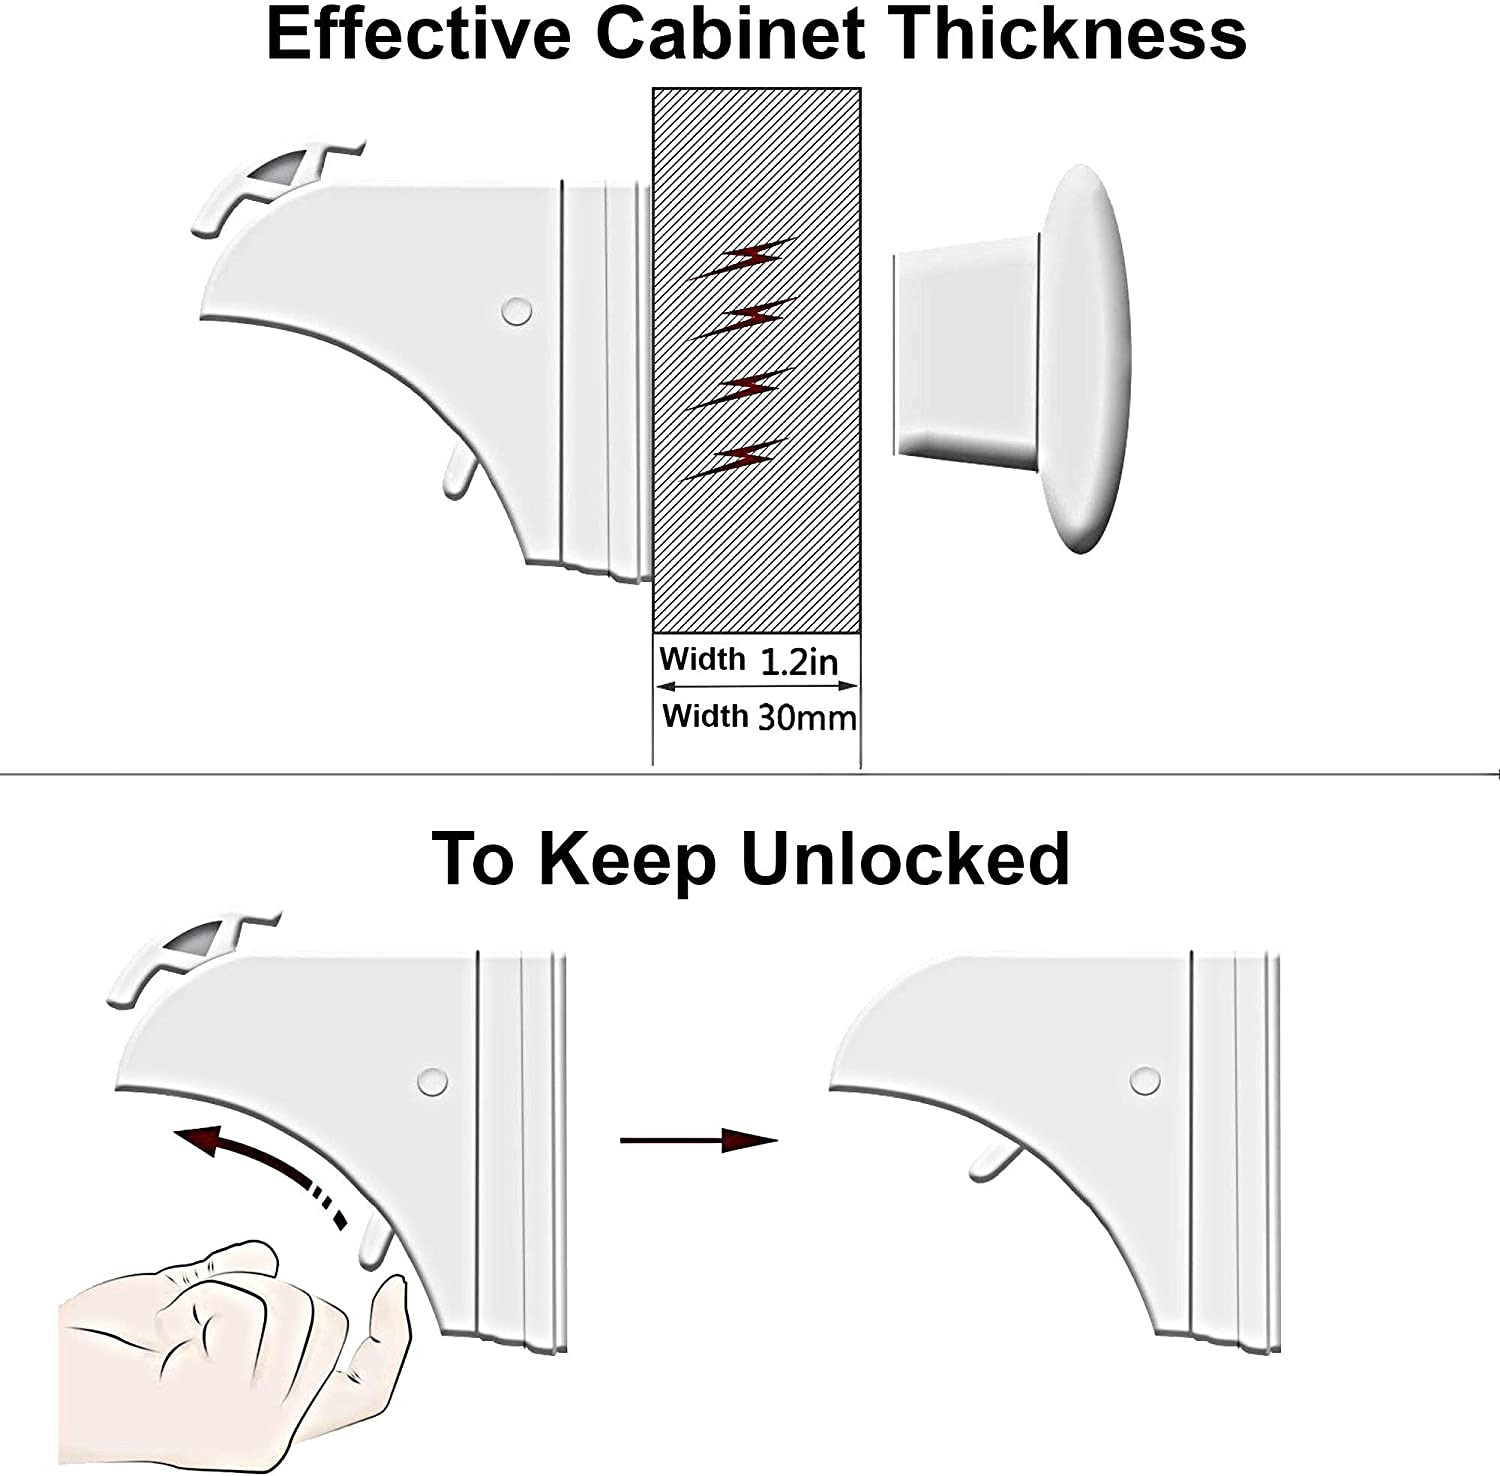 Magnetic Child Safety Locks for Cupboards and Drawers - 10 Locks 2 Keys by Baba